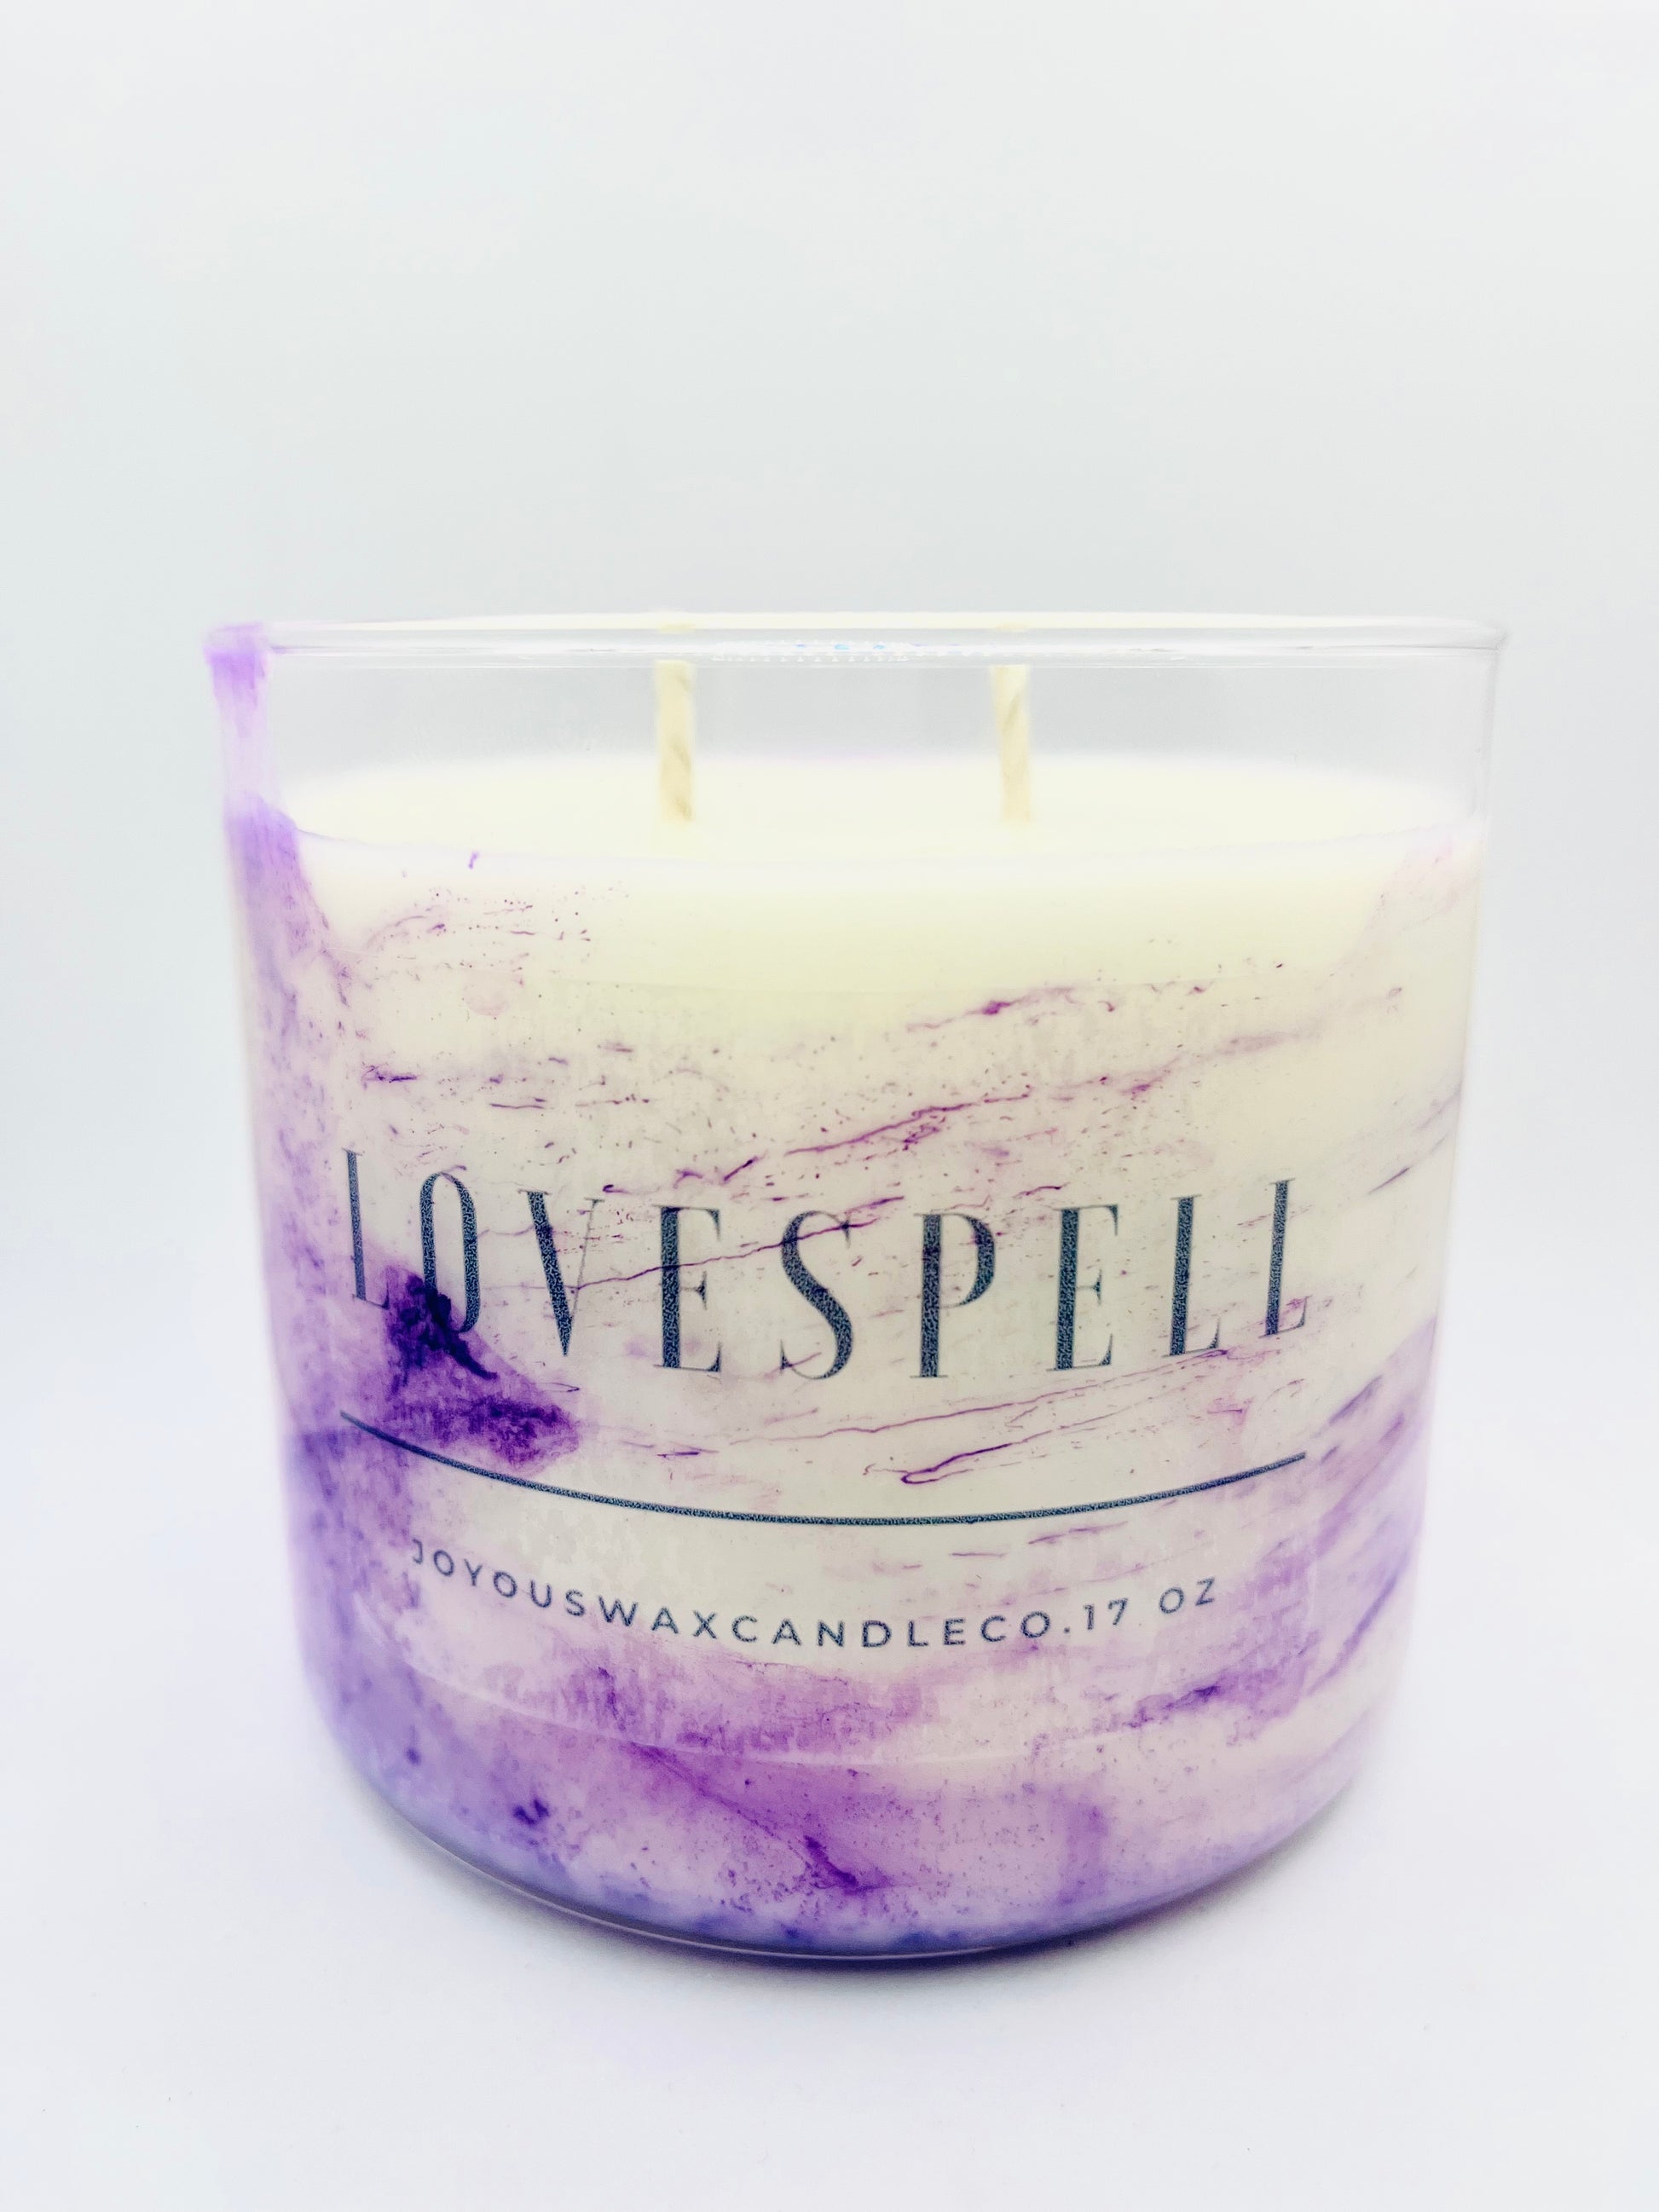 Happy Wax Candies – Wick Therapy Candle